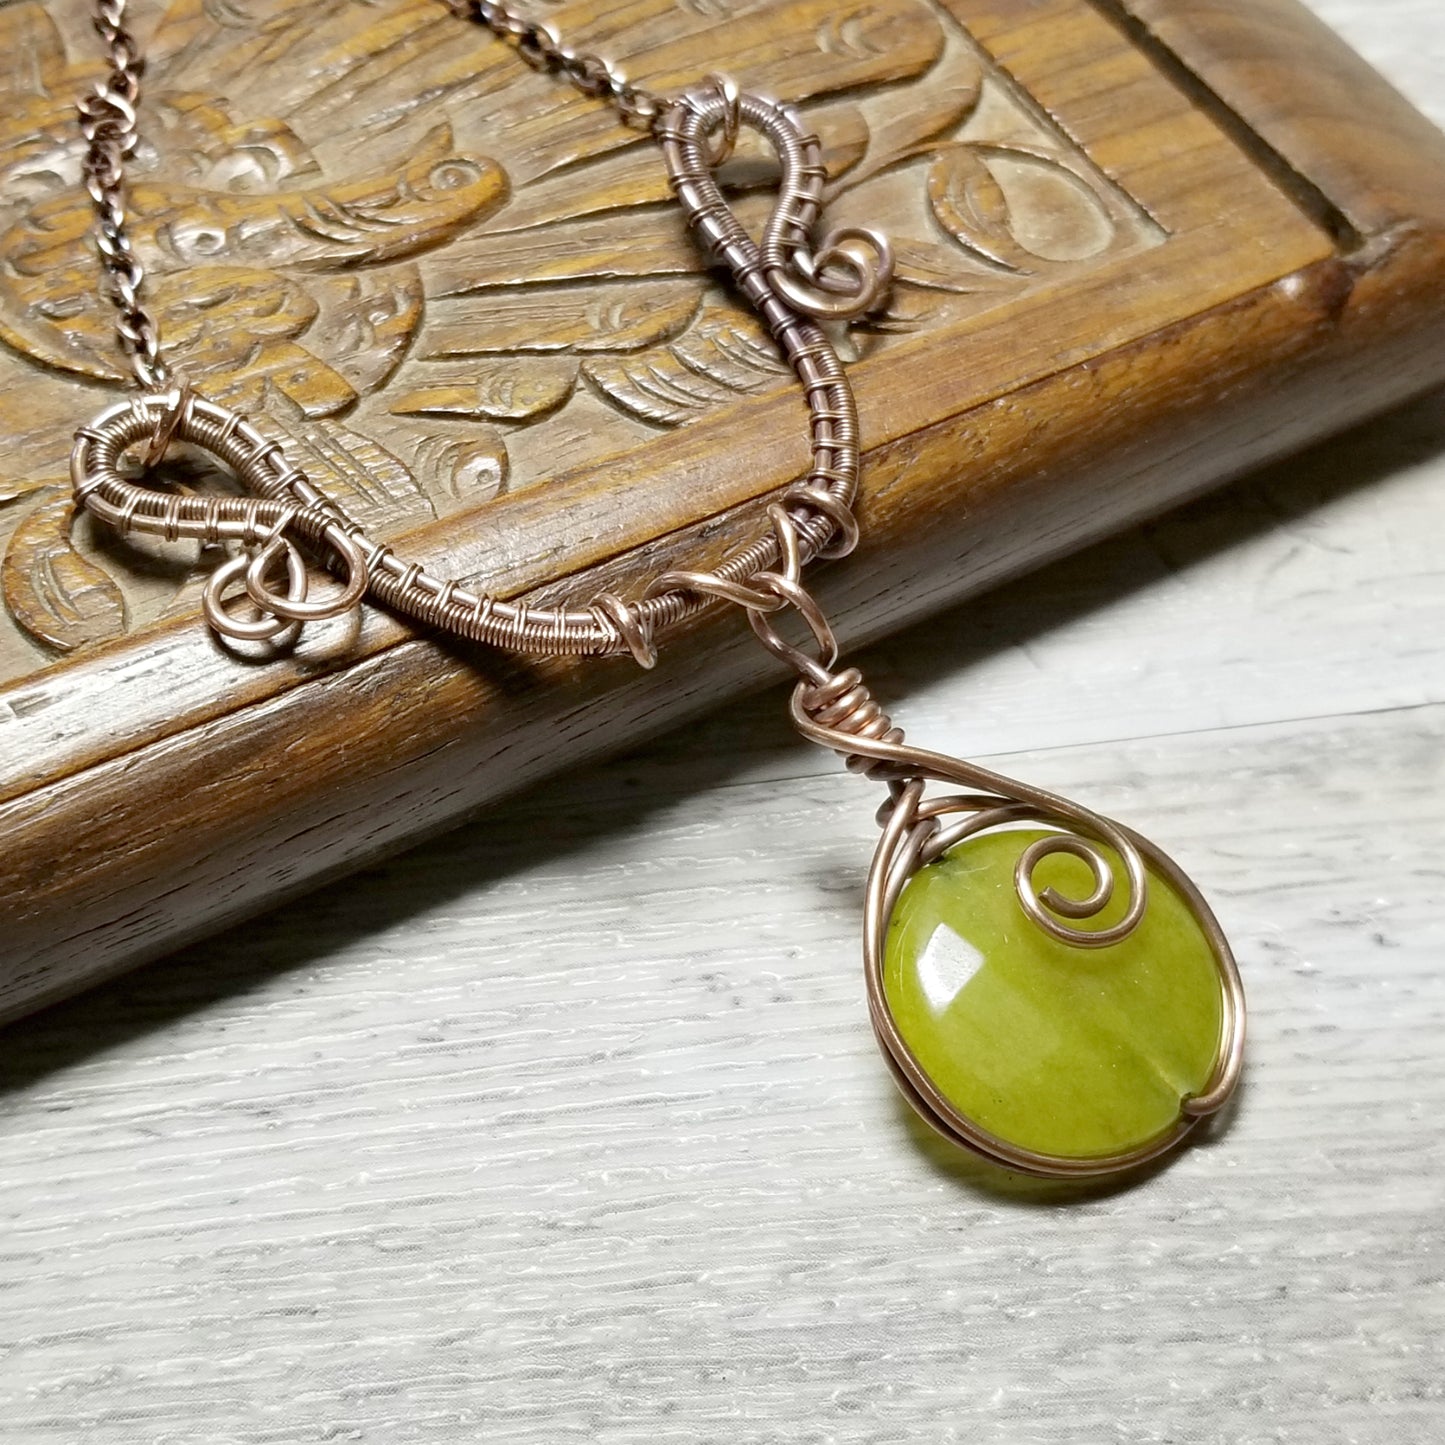 Jewelry for Women, Wire Wrapped Gemstone Pendant